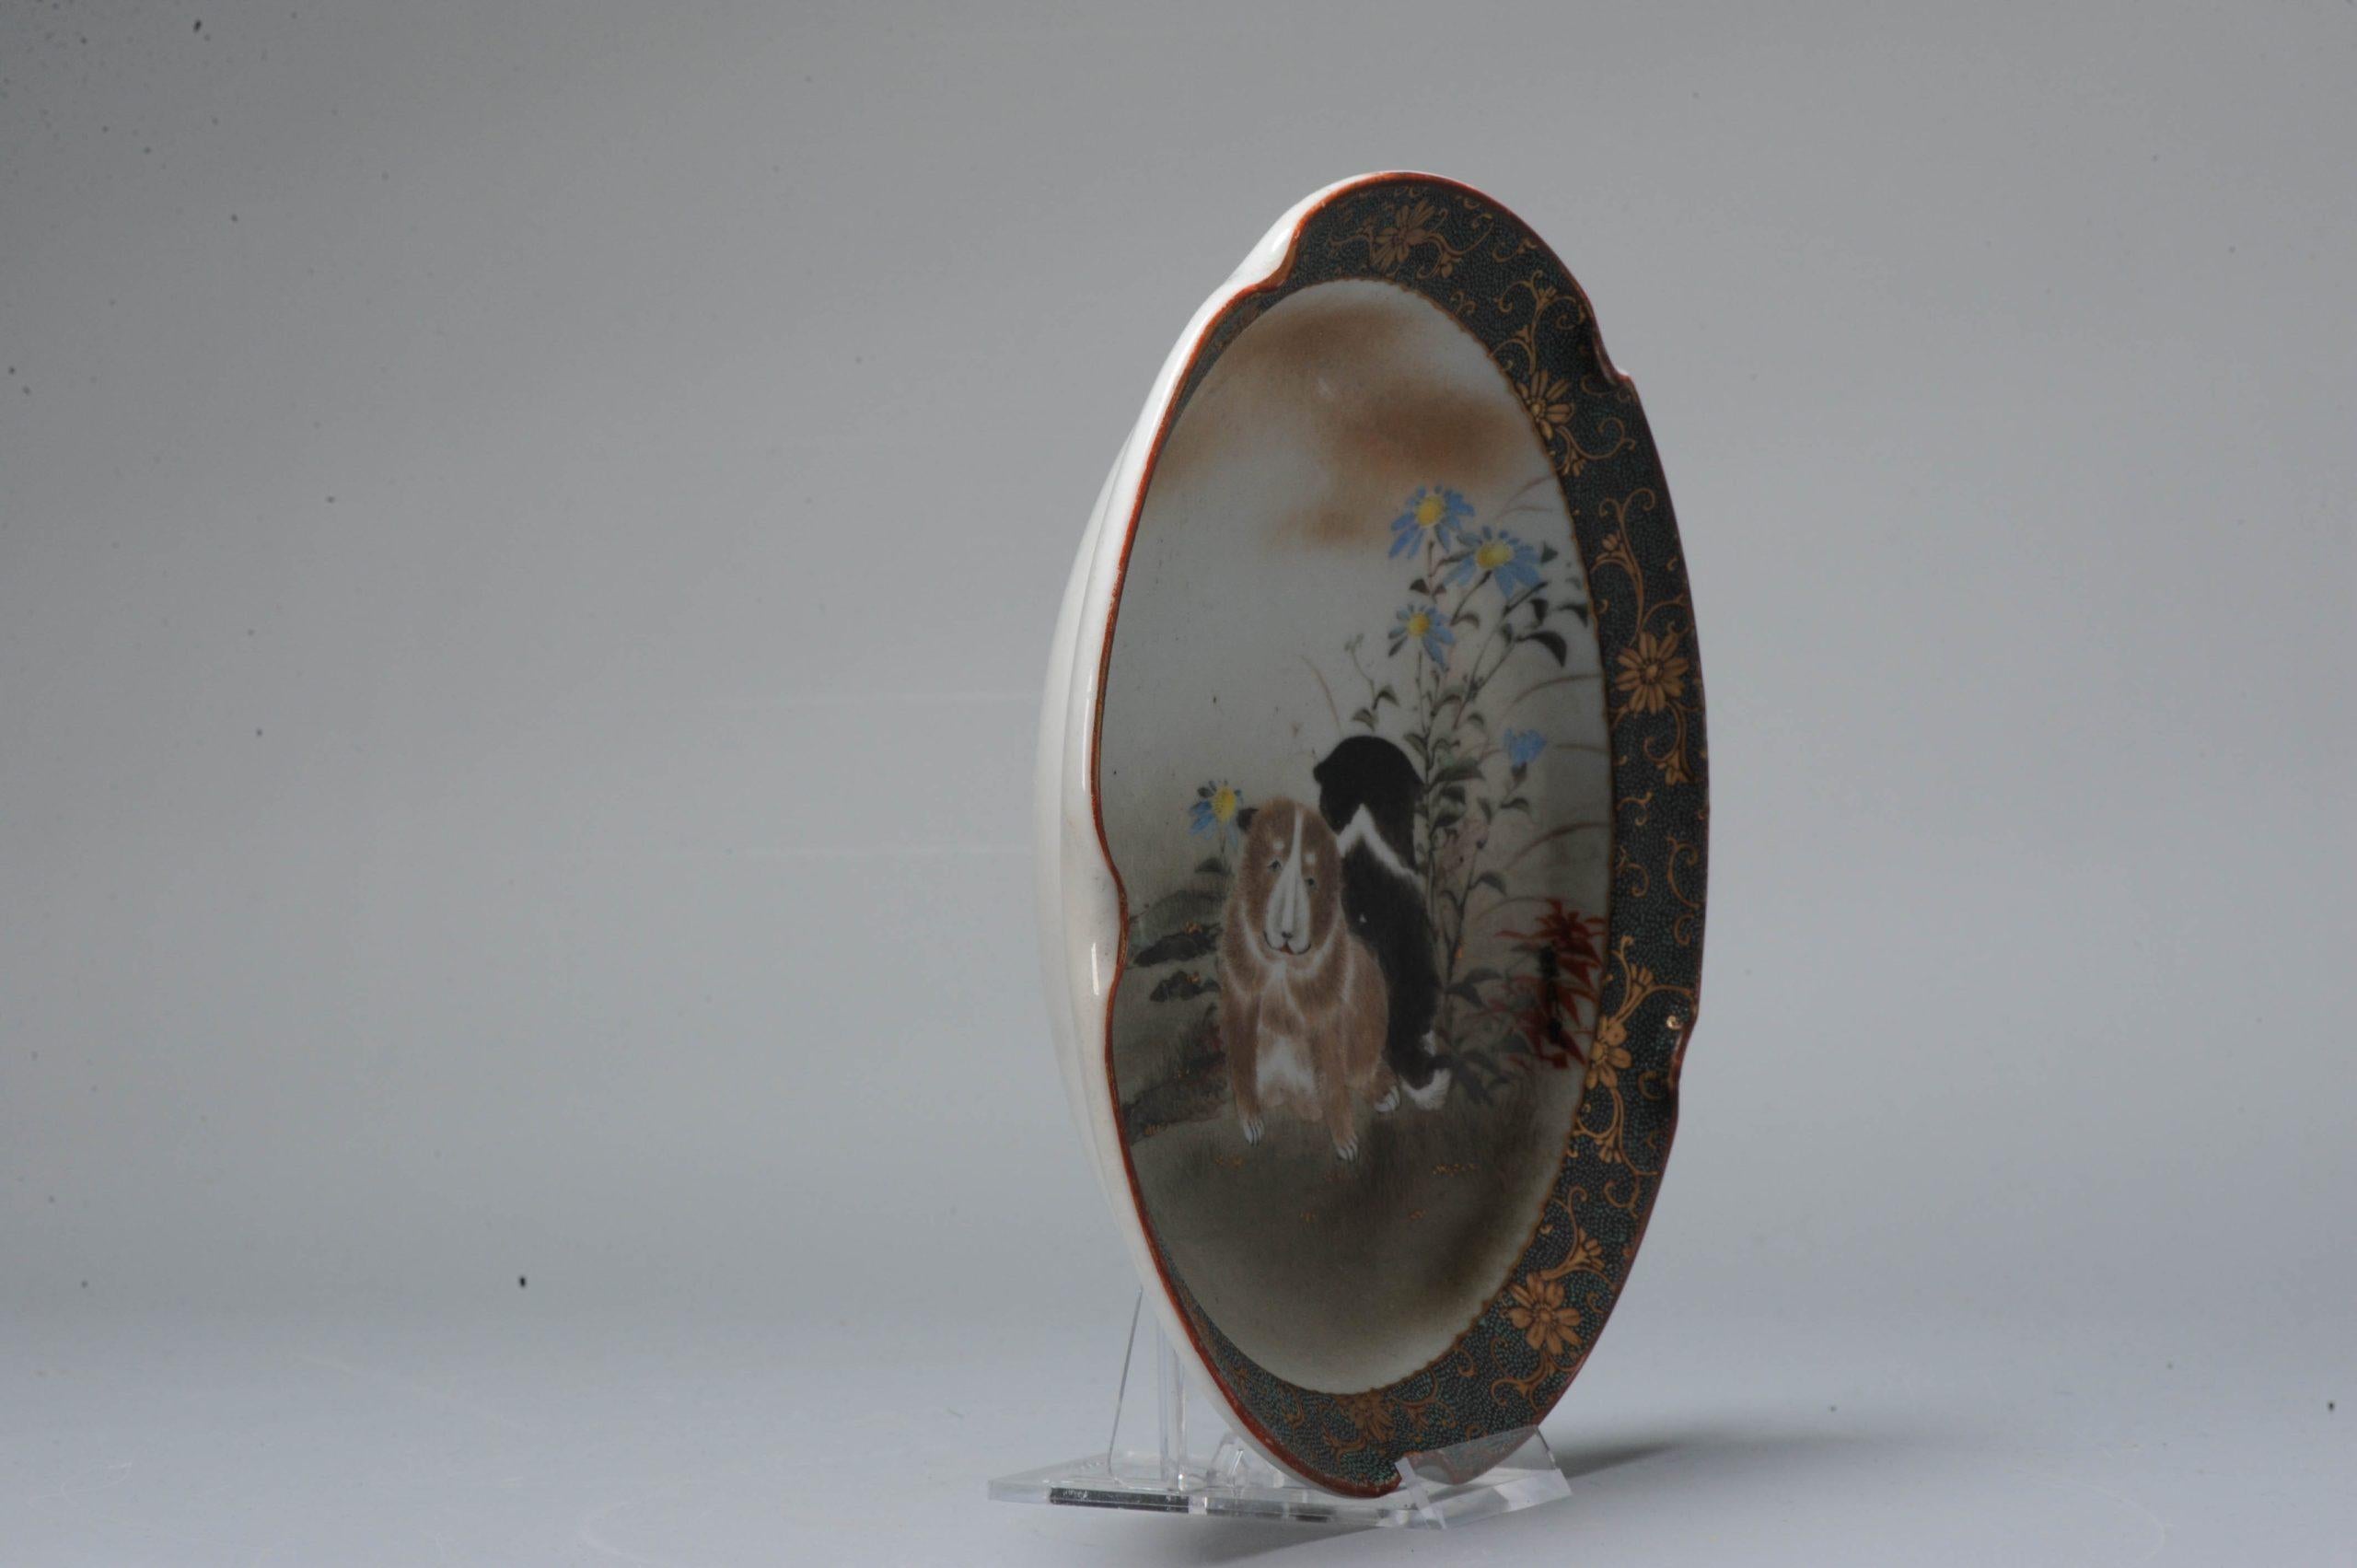 Faboulous japanese porcelain plate with unusual design of small dogs. Very high quality painting.

Mark at the base.

Additional information:
Material: Porcelain & Pottery
Type: Bowls
Japanese Style: Kutani
Region of Origin: Japan
Period: 20th